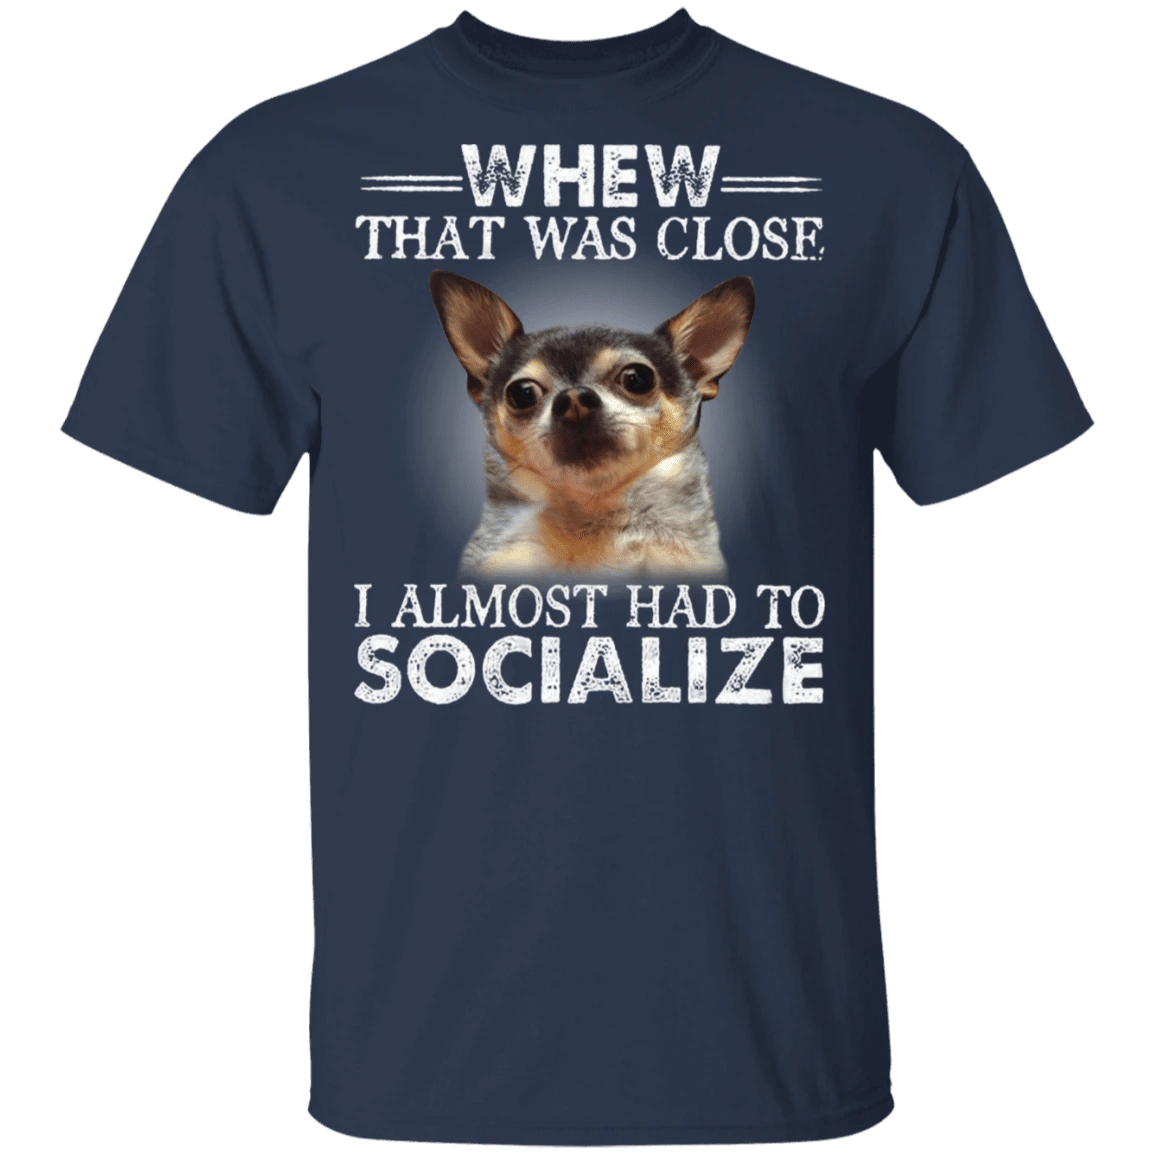 Chihuahua Whew That Was Close I Almost Had To Socialize Funny Dog Shirt Chihuahua Gift